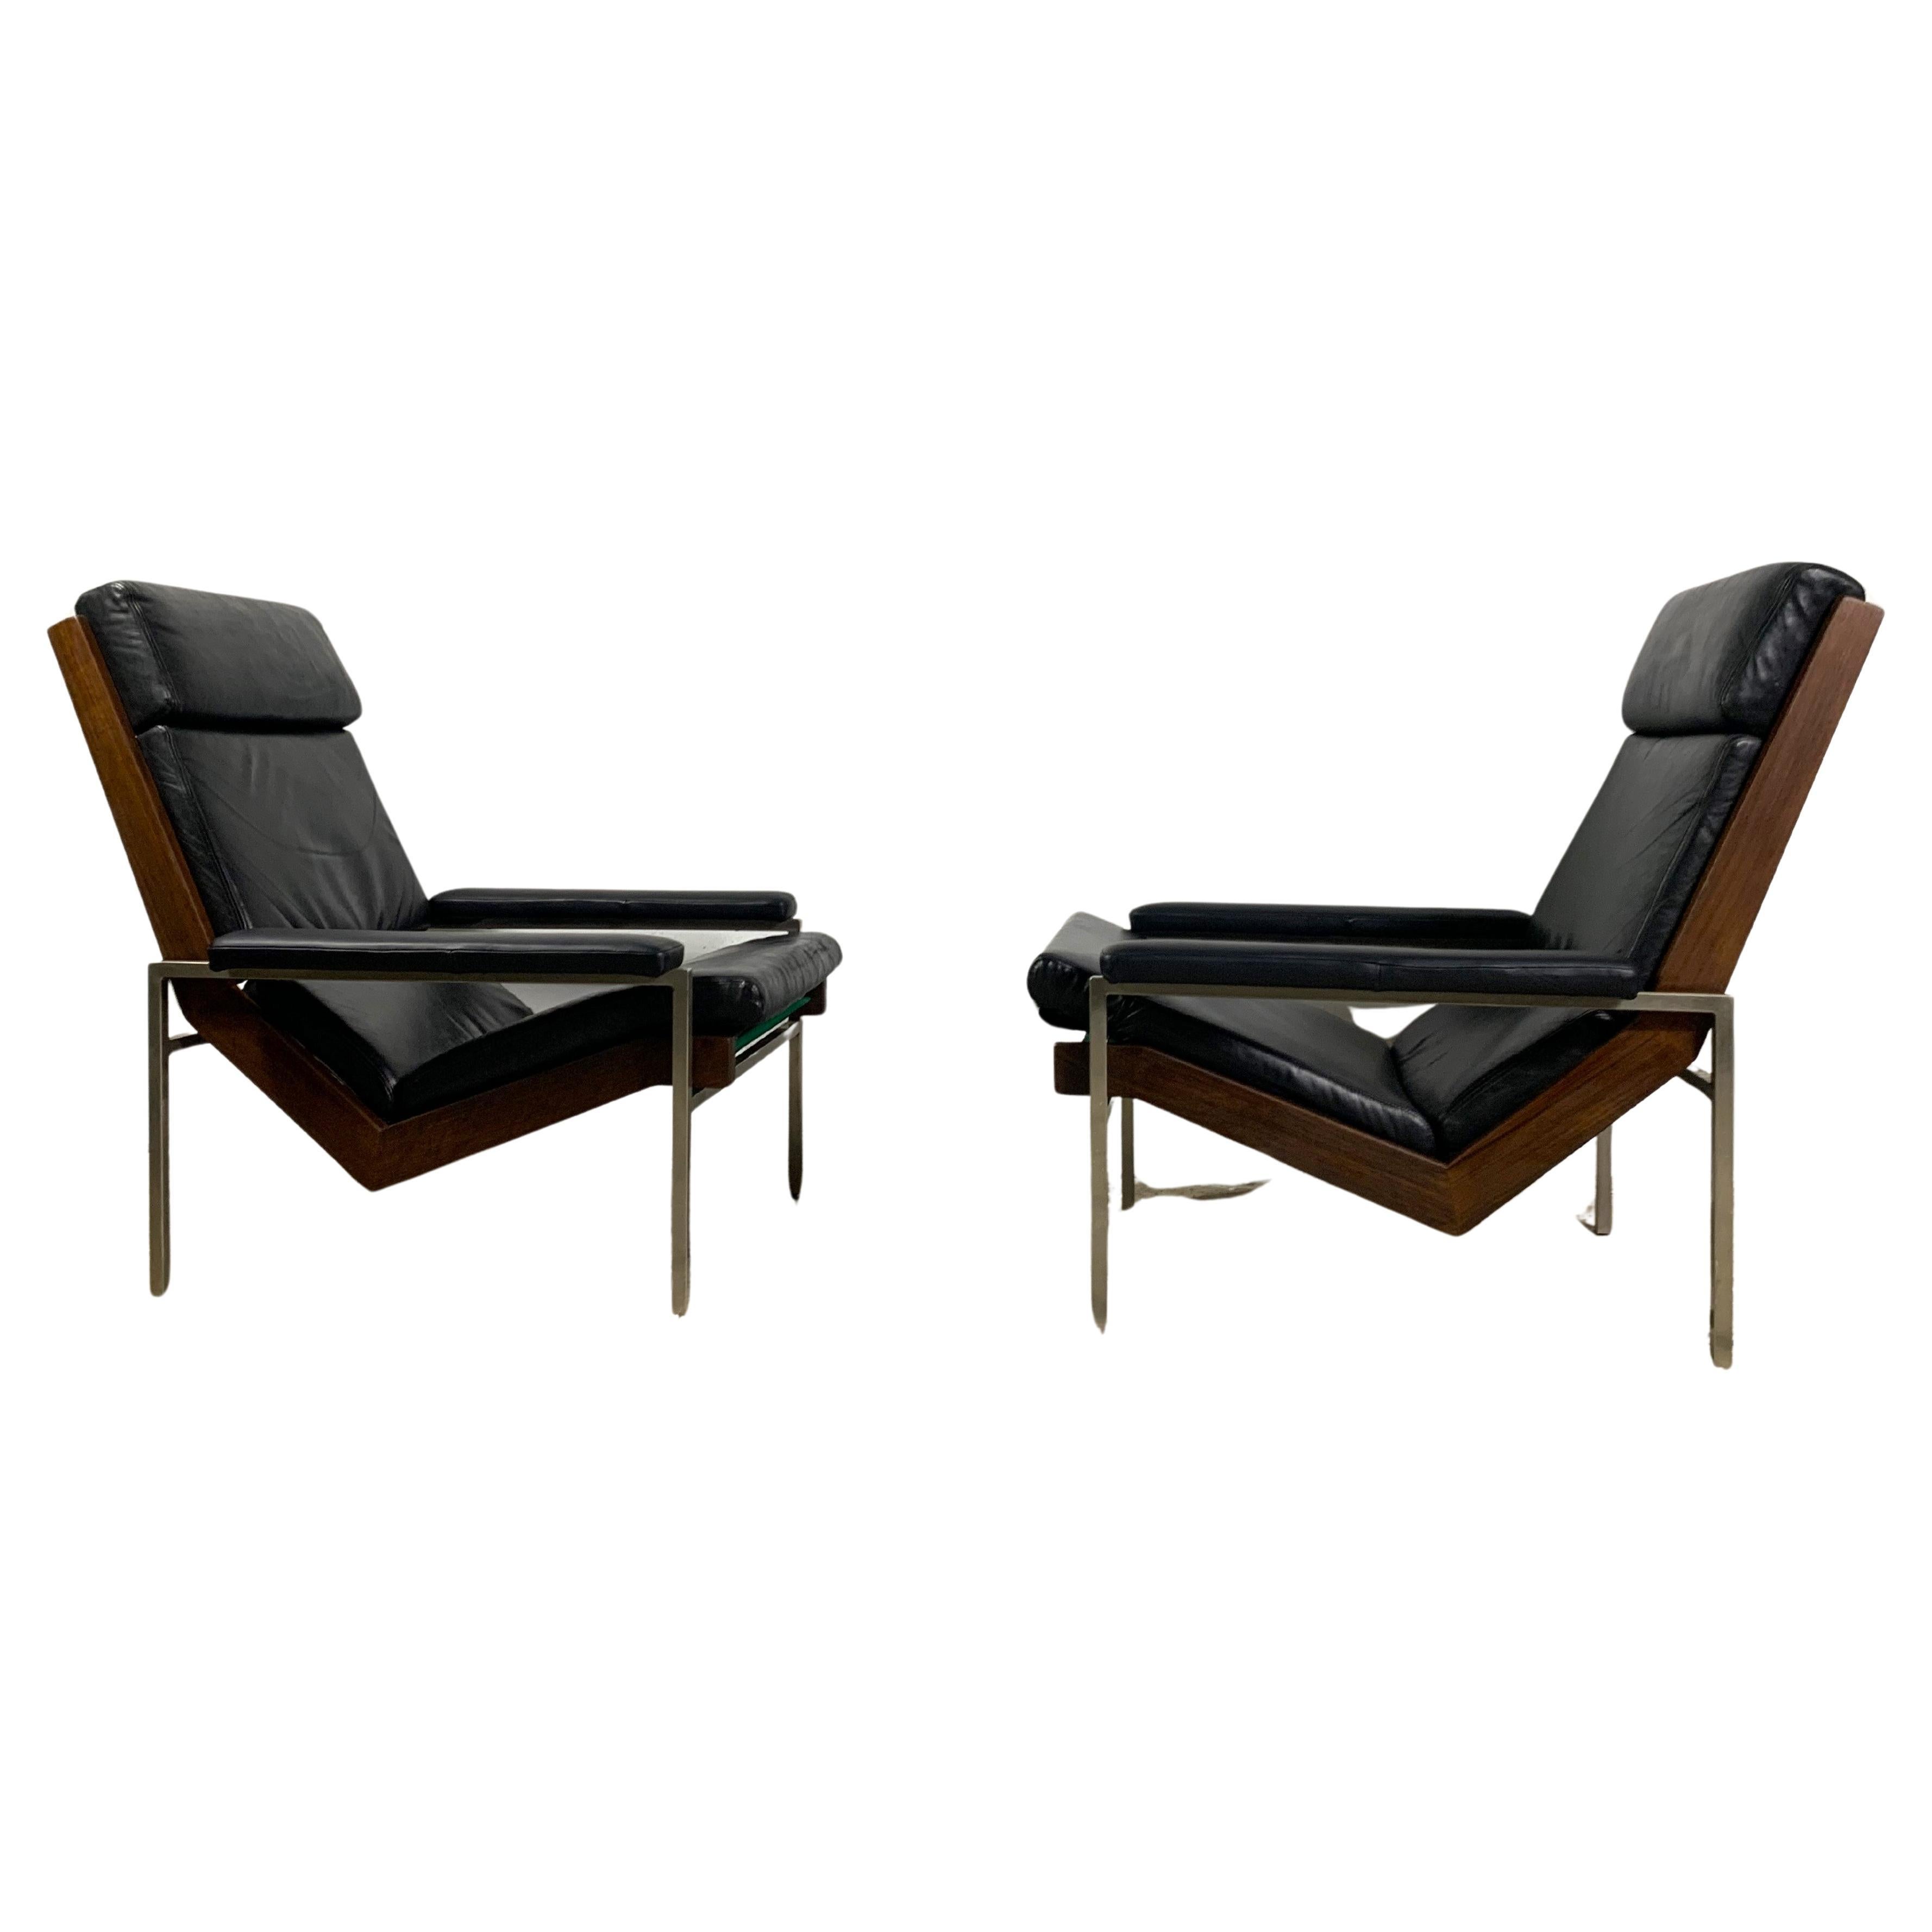 Rob Parry Lotus Armchairs, Rosewood And Leather, 1960s For Sale